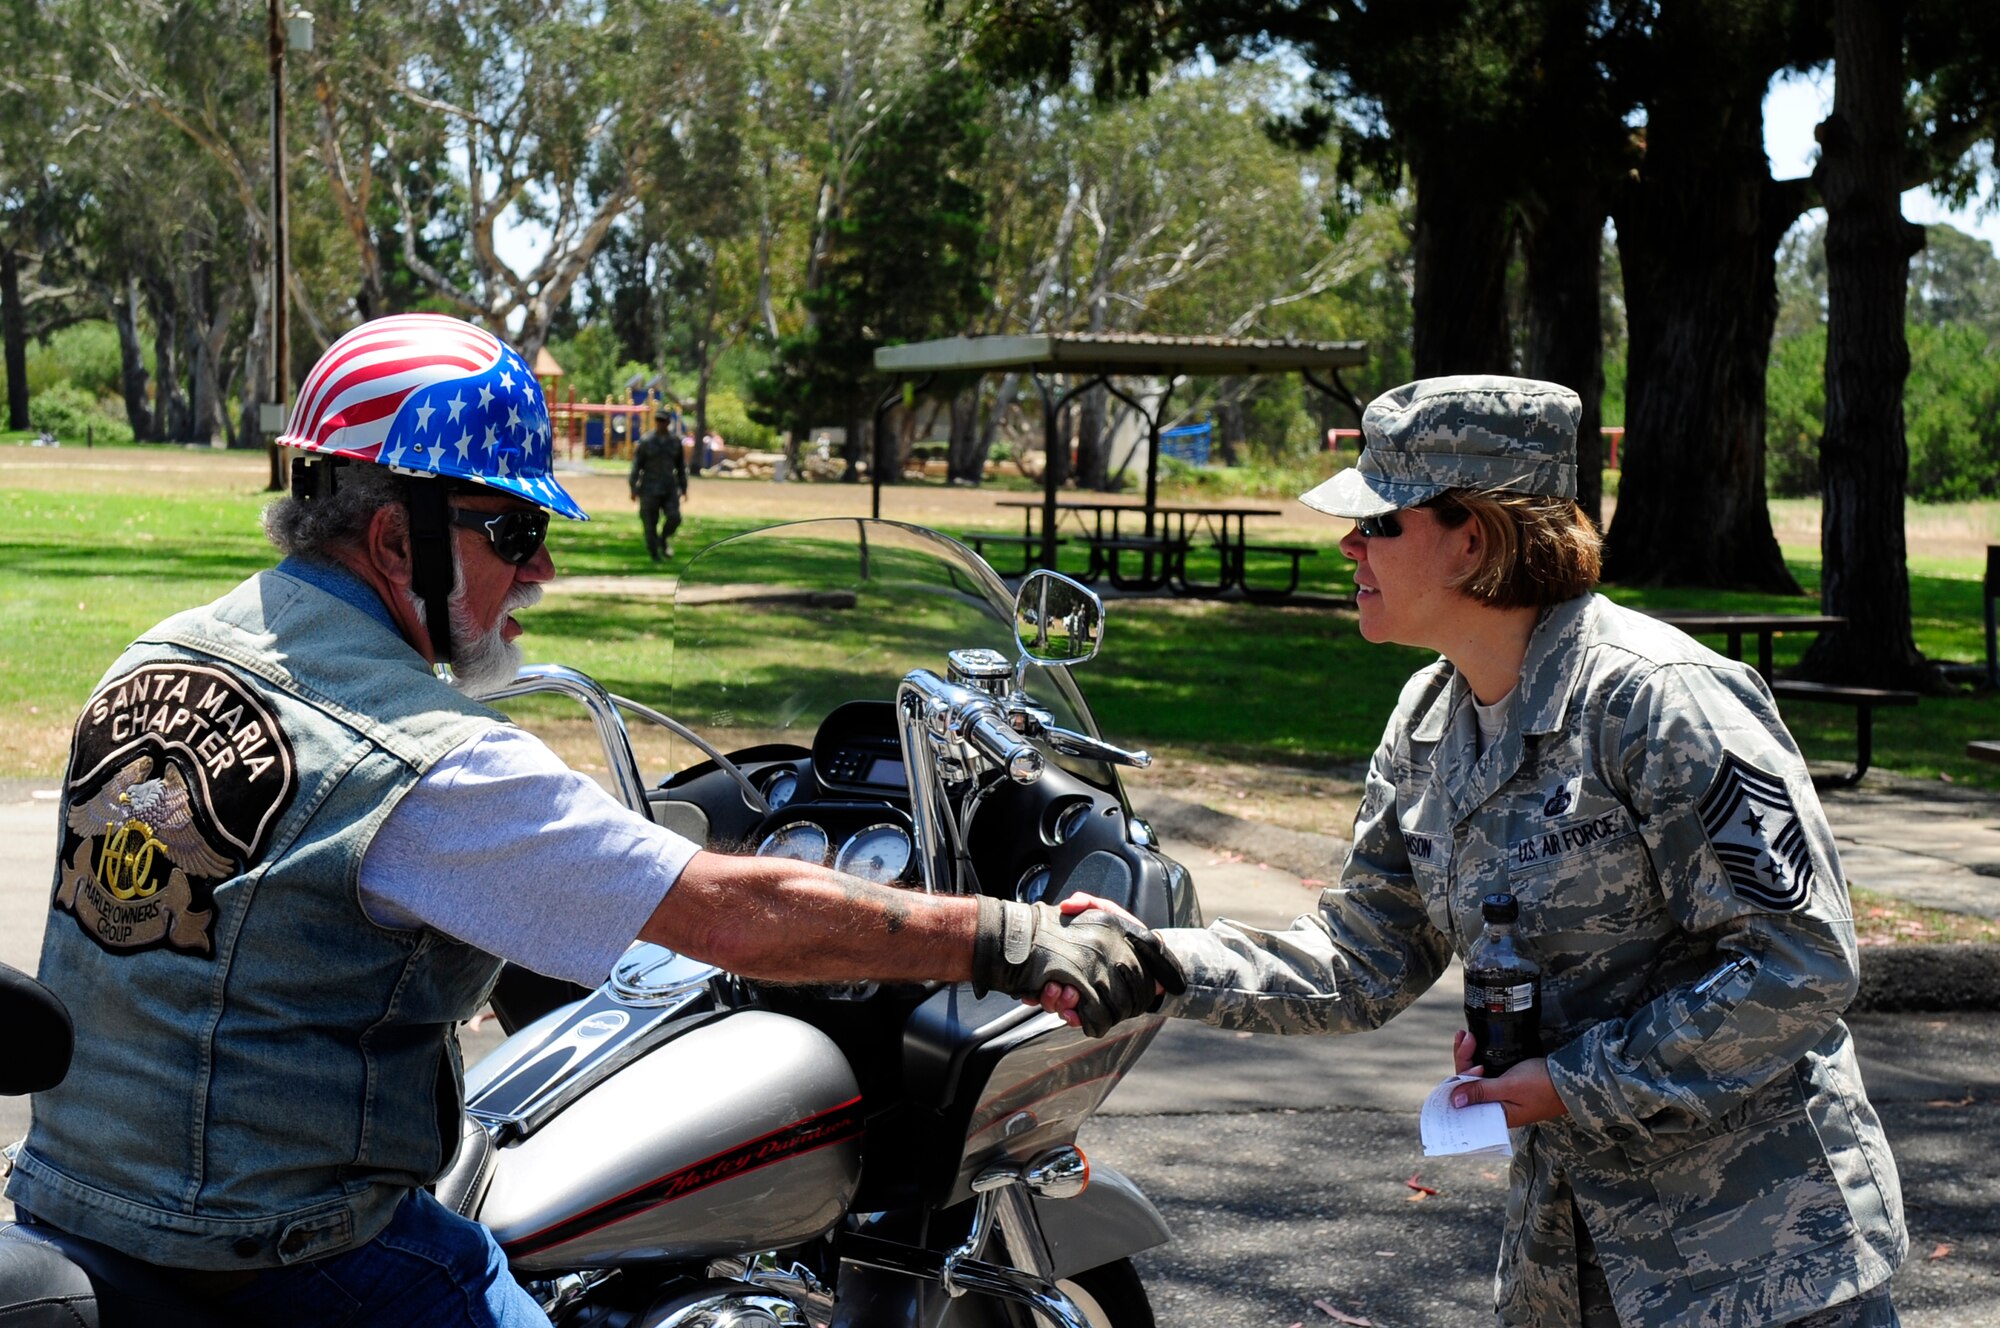 VANDENBERG AIR FORCE BASE, Calif. – Members of the Nation of Patriots Tour surprise Chief Master Sgt. Angelica Johnson, the former 30th Space Wing command chief, by driving by her going away barbeque at Cocheo Park here Thursday, July 28, 2011. The Patriot Tour travels the U.S. with an American flag to 48 states over 100 days. (U.S. Air Force photo/Senior Airman Lael Huss)